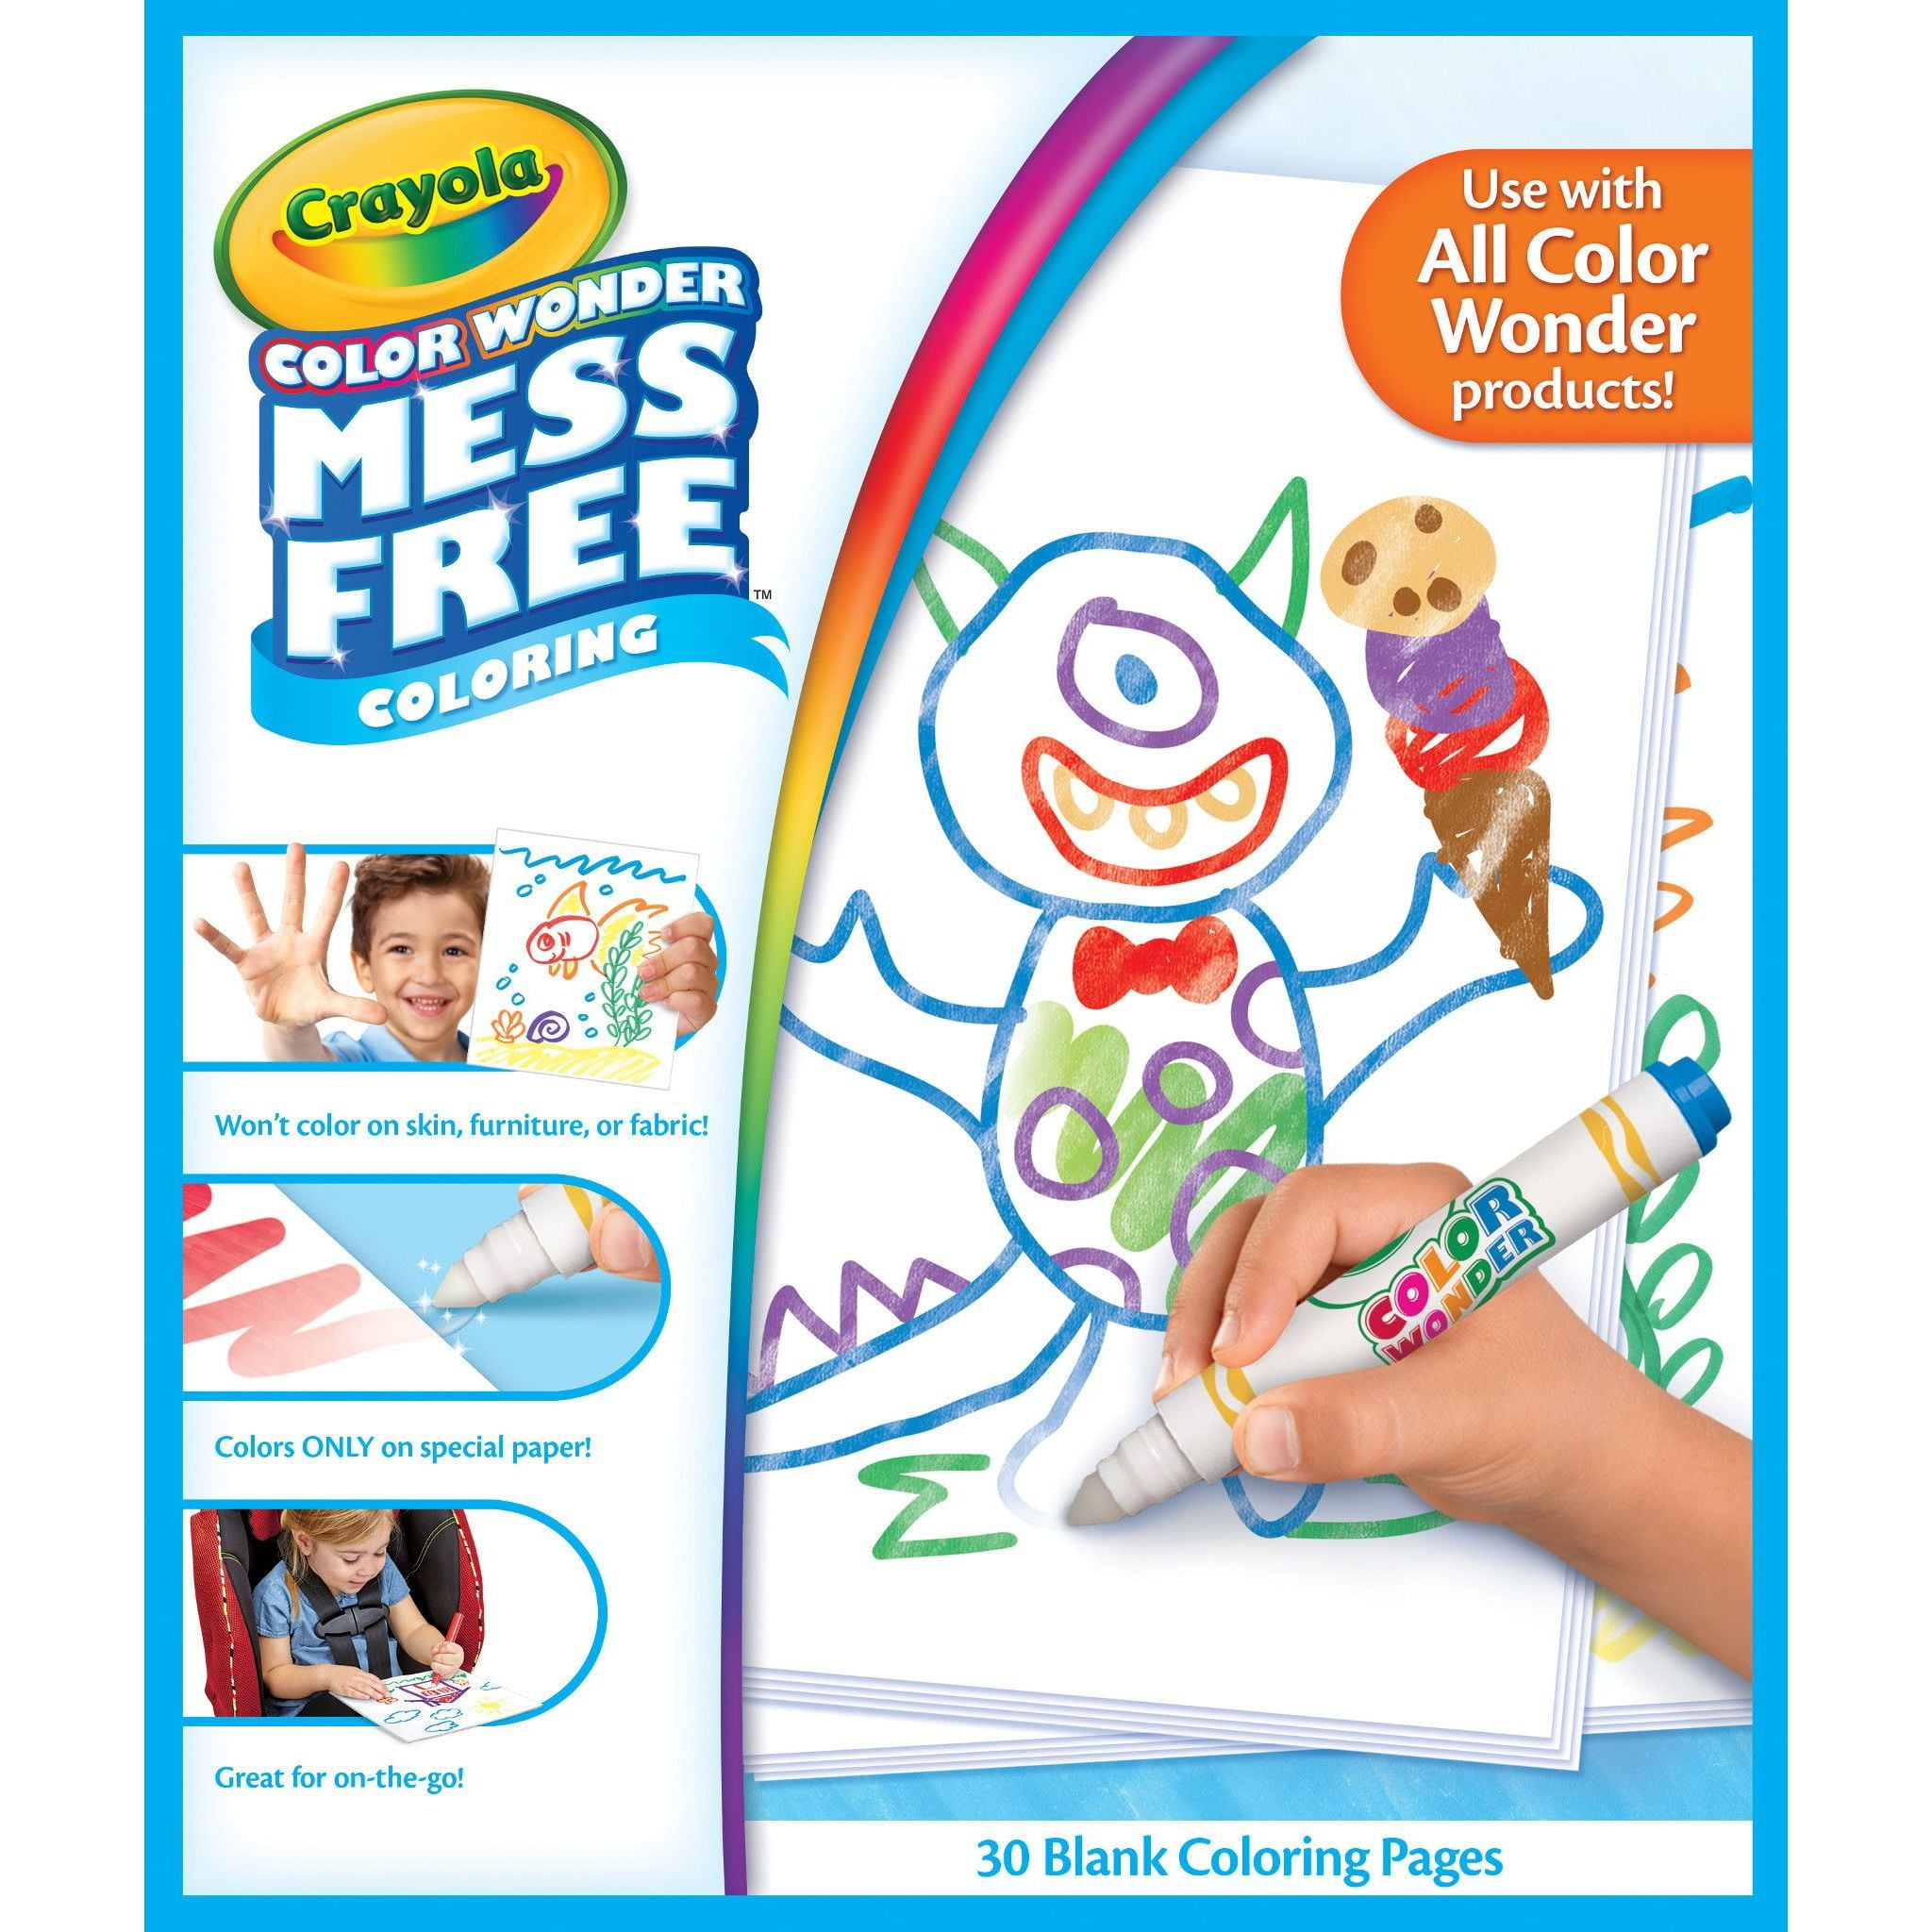 Crayola Color Wonder Mess Free Coloring Pages, Toddler Toys, School Supplies, Blank Refill Paper